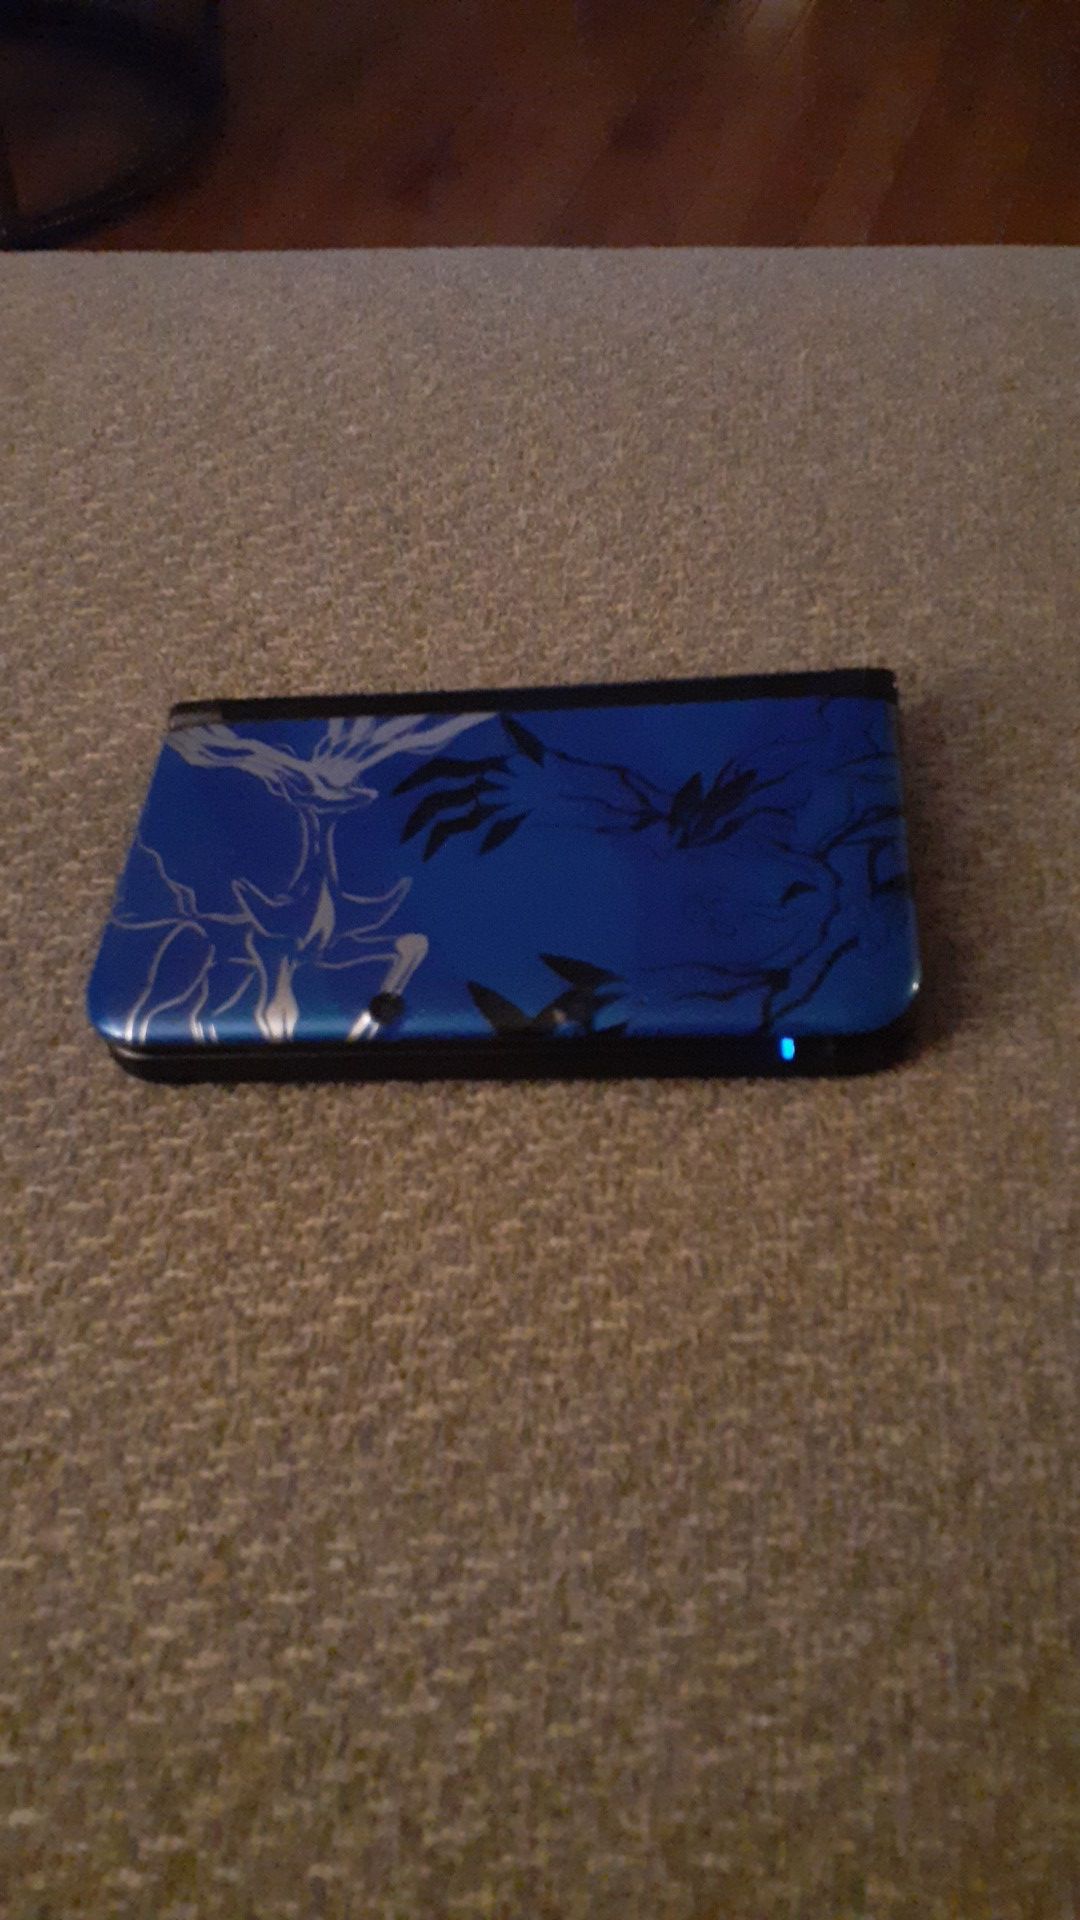 Nintendo 3ds XL Pokemon X and Y special edition